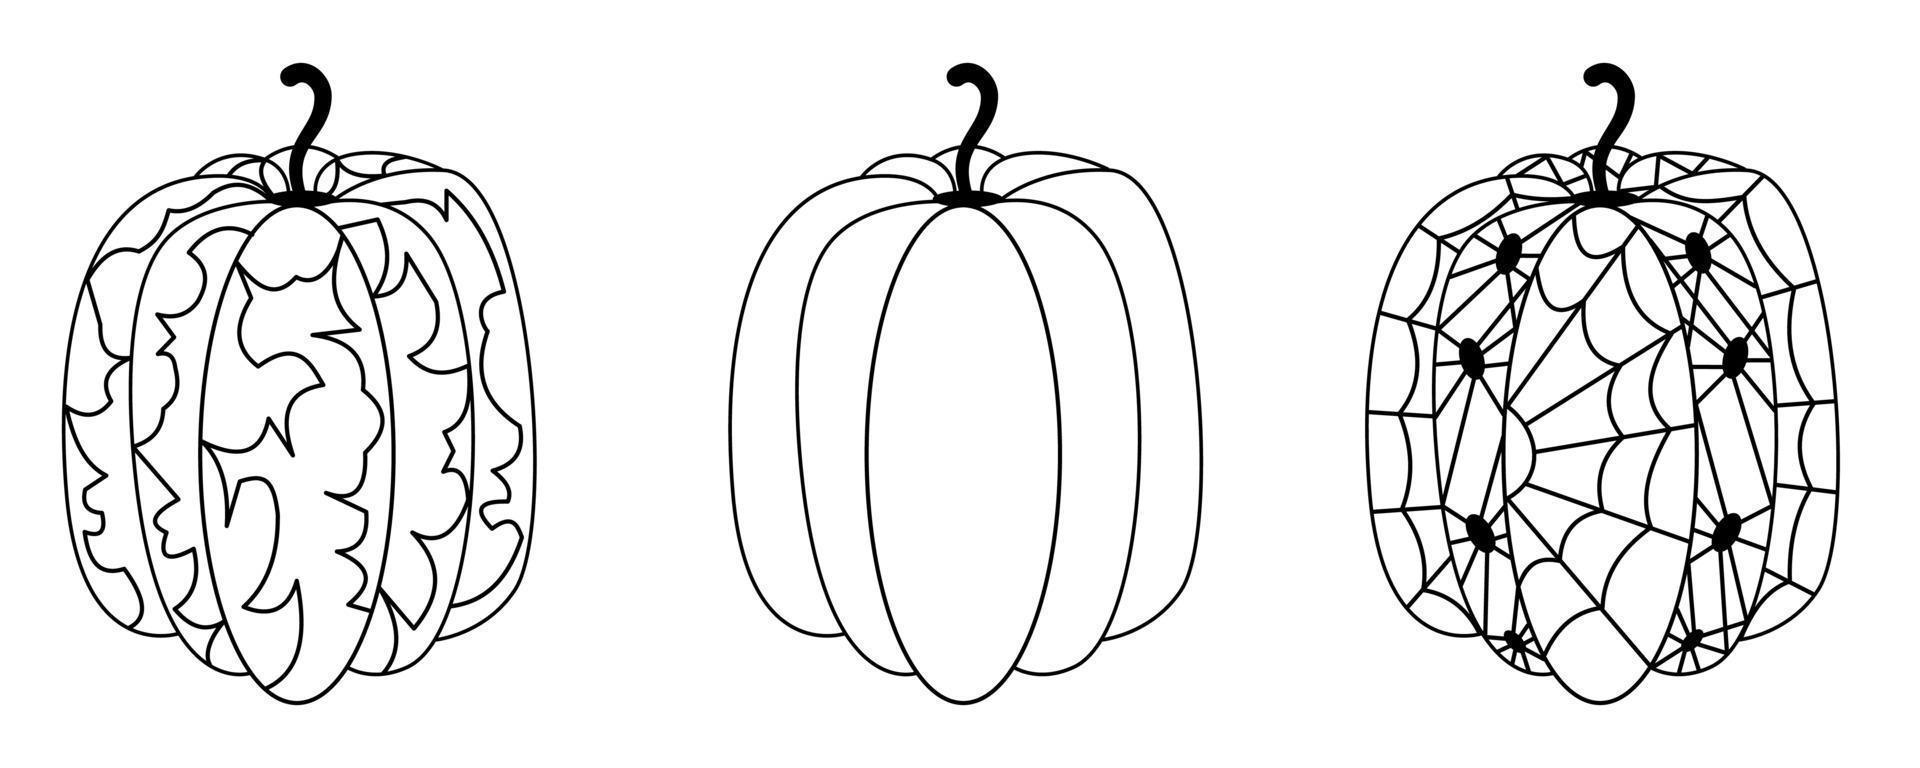 Set black and white pumpkins Halloween. Contoured pumpkins with abstract pattern, with spiders and cobwebs, simple. Vector illustration in a simple outline style for Halloween holiday, decoration